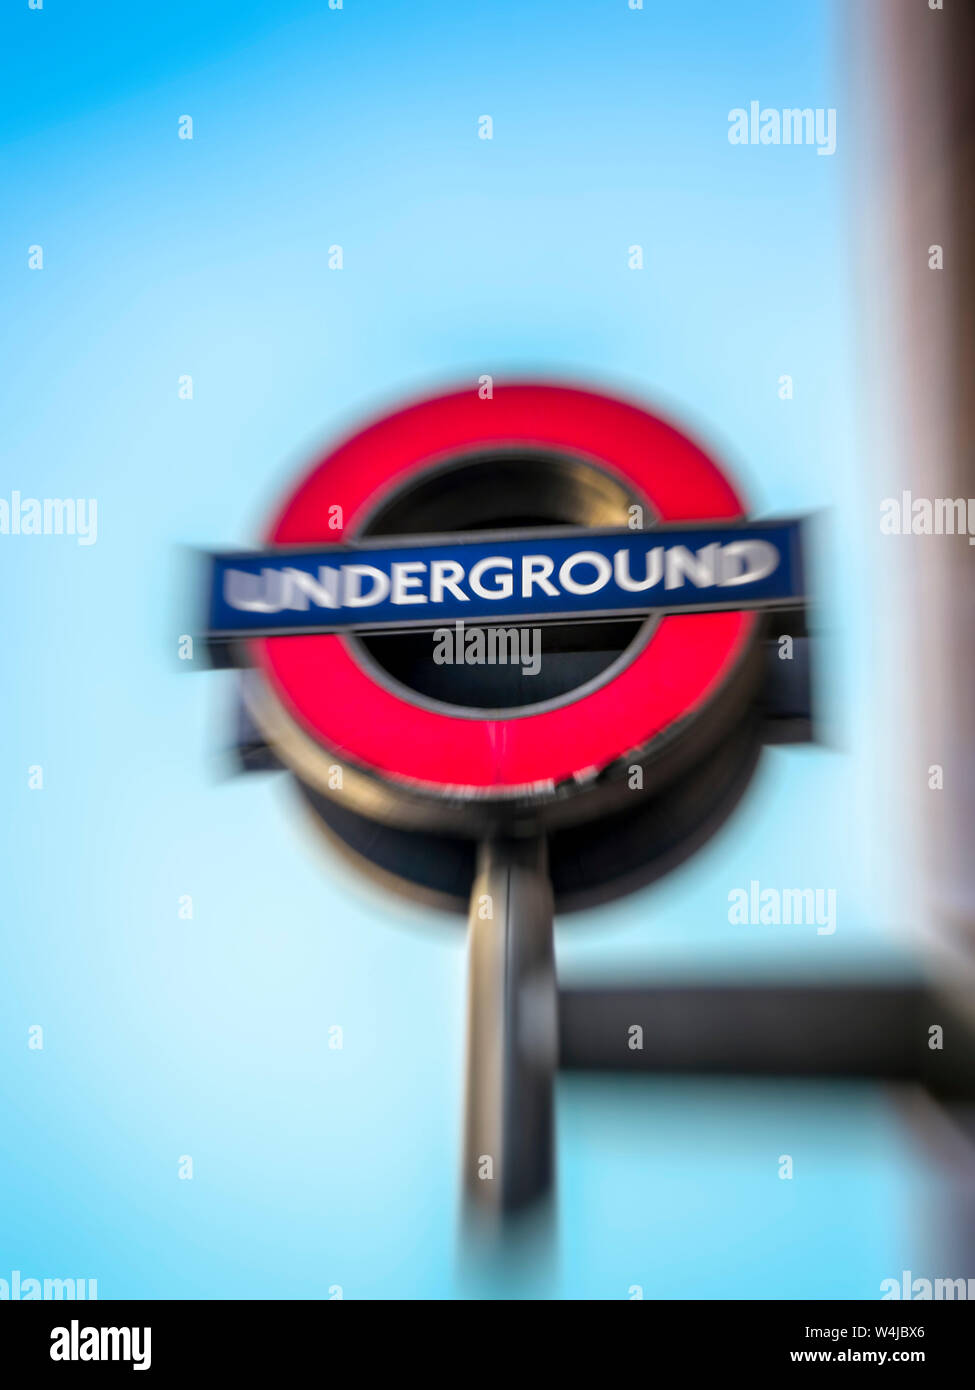 London Underground sign. London, England. The photograph was processed with a motion blur effect. Stock Photo